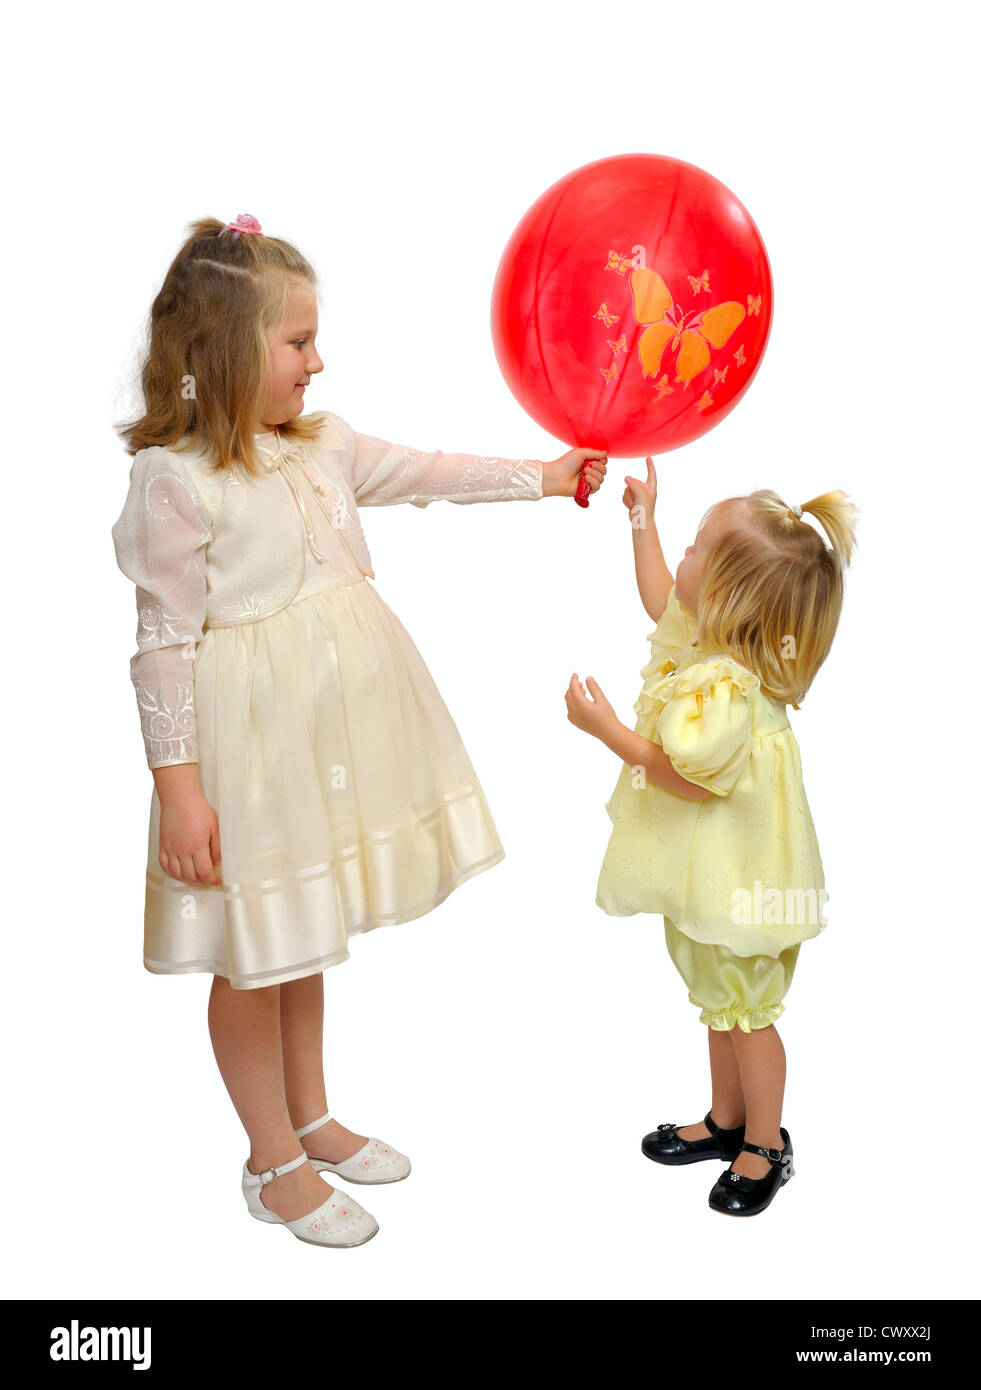 Balloon dresses Cut Out Stock Images & Pictures - Alamy